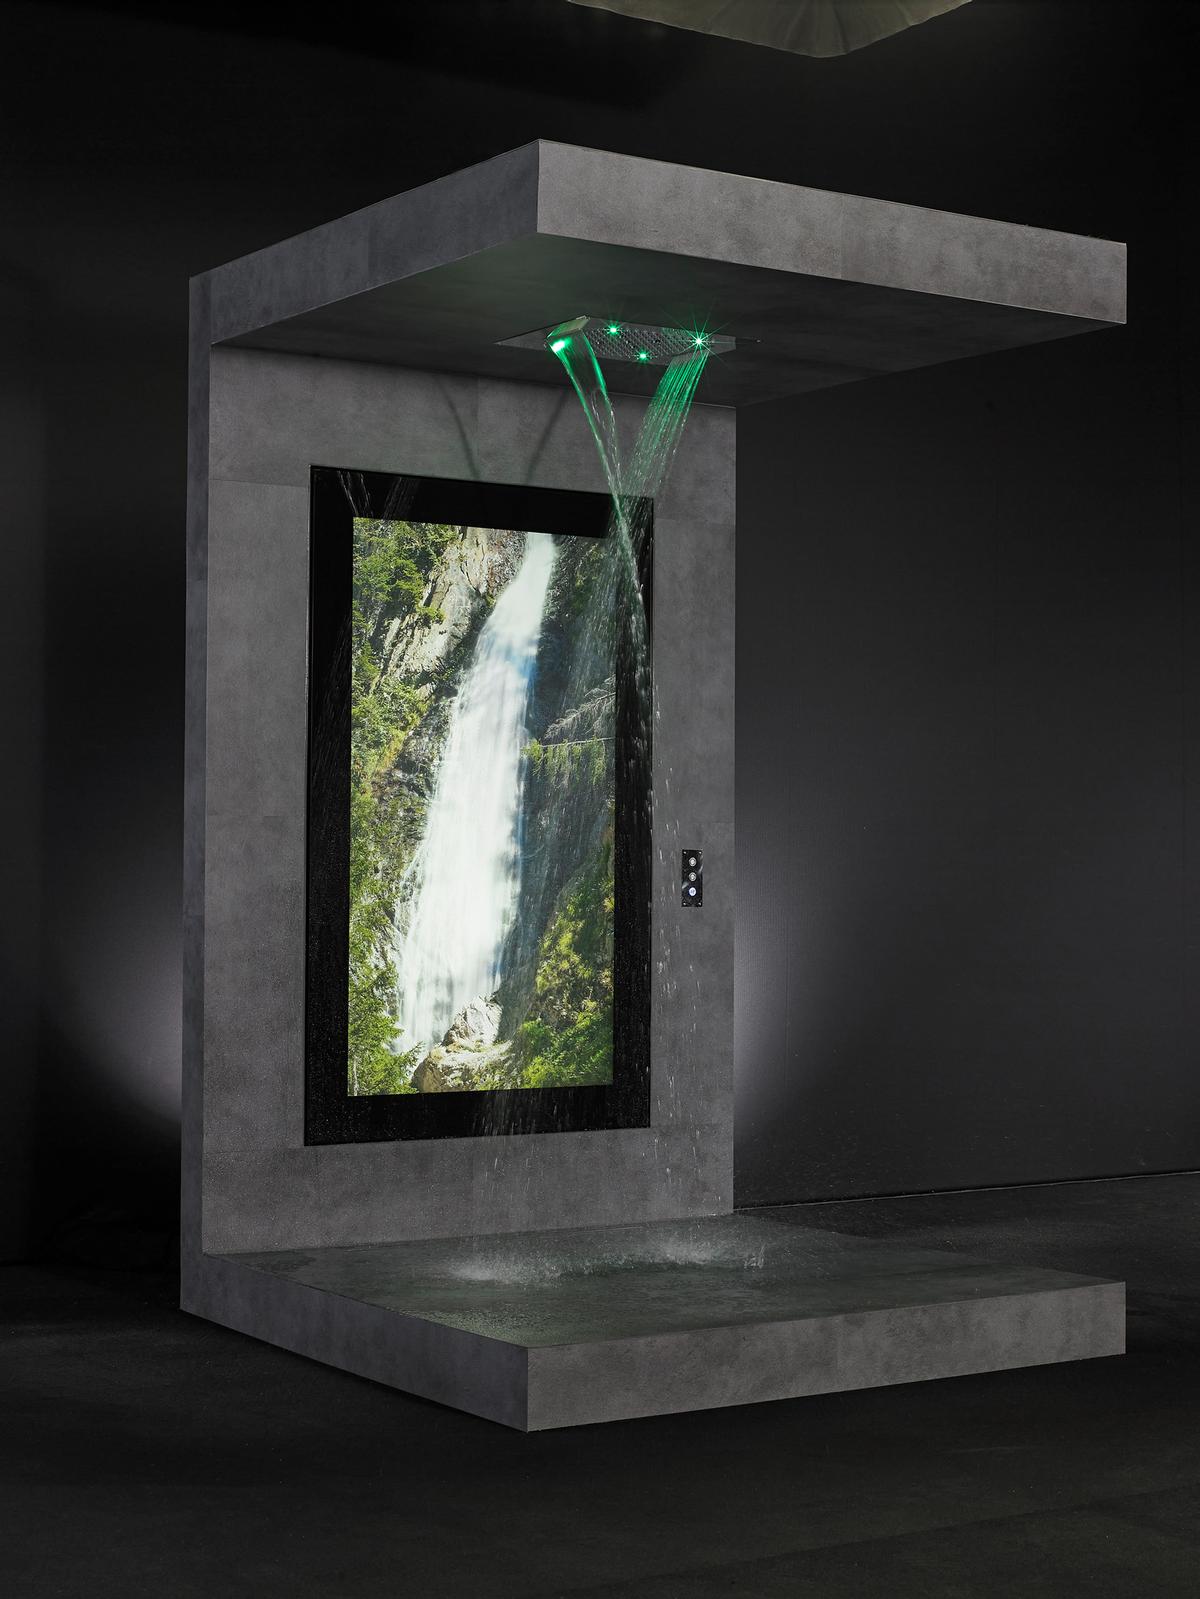 With the activation of the shower programmes, corresponding nature visuals start simultaneously on the screen / 